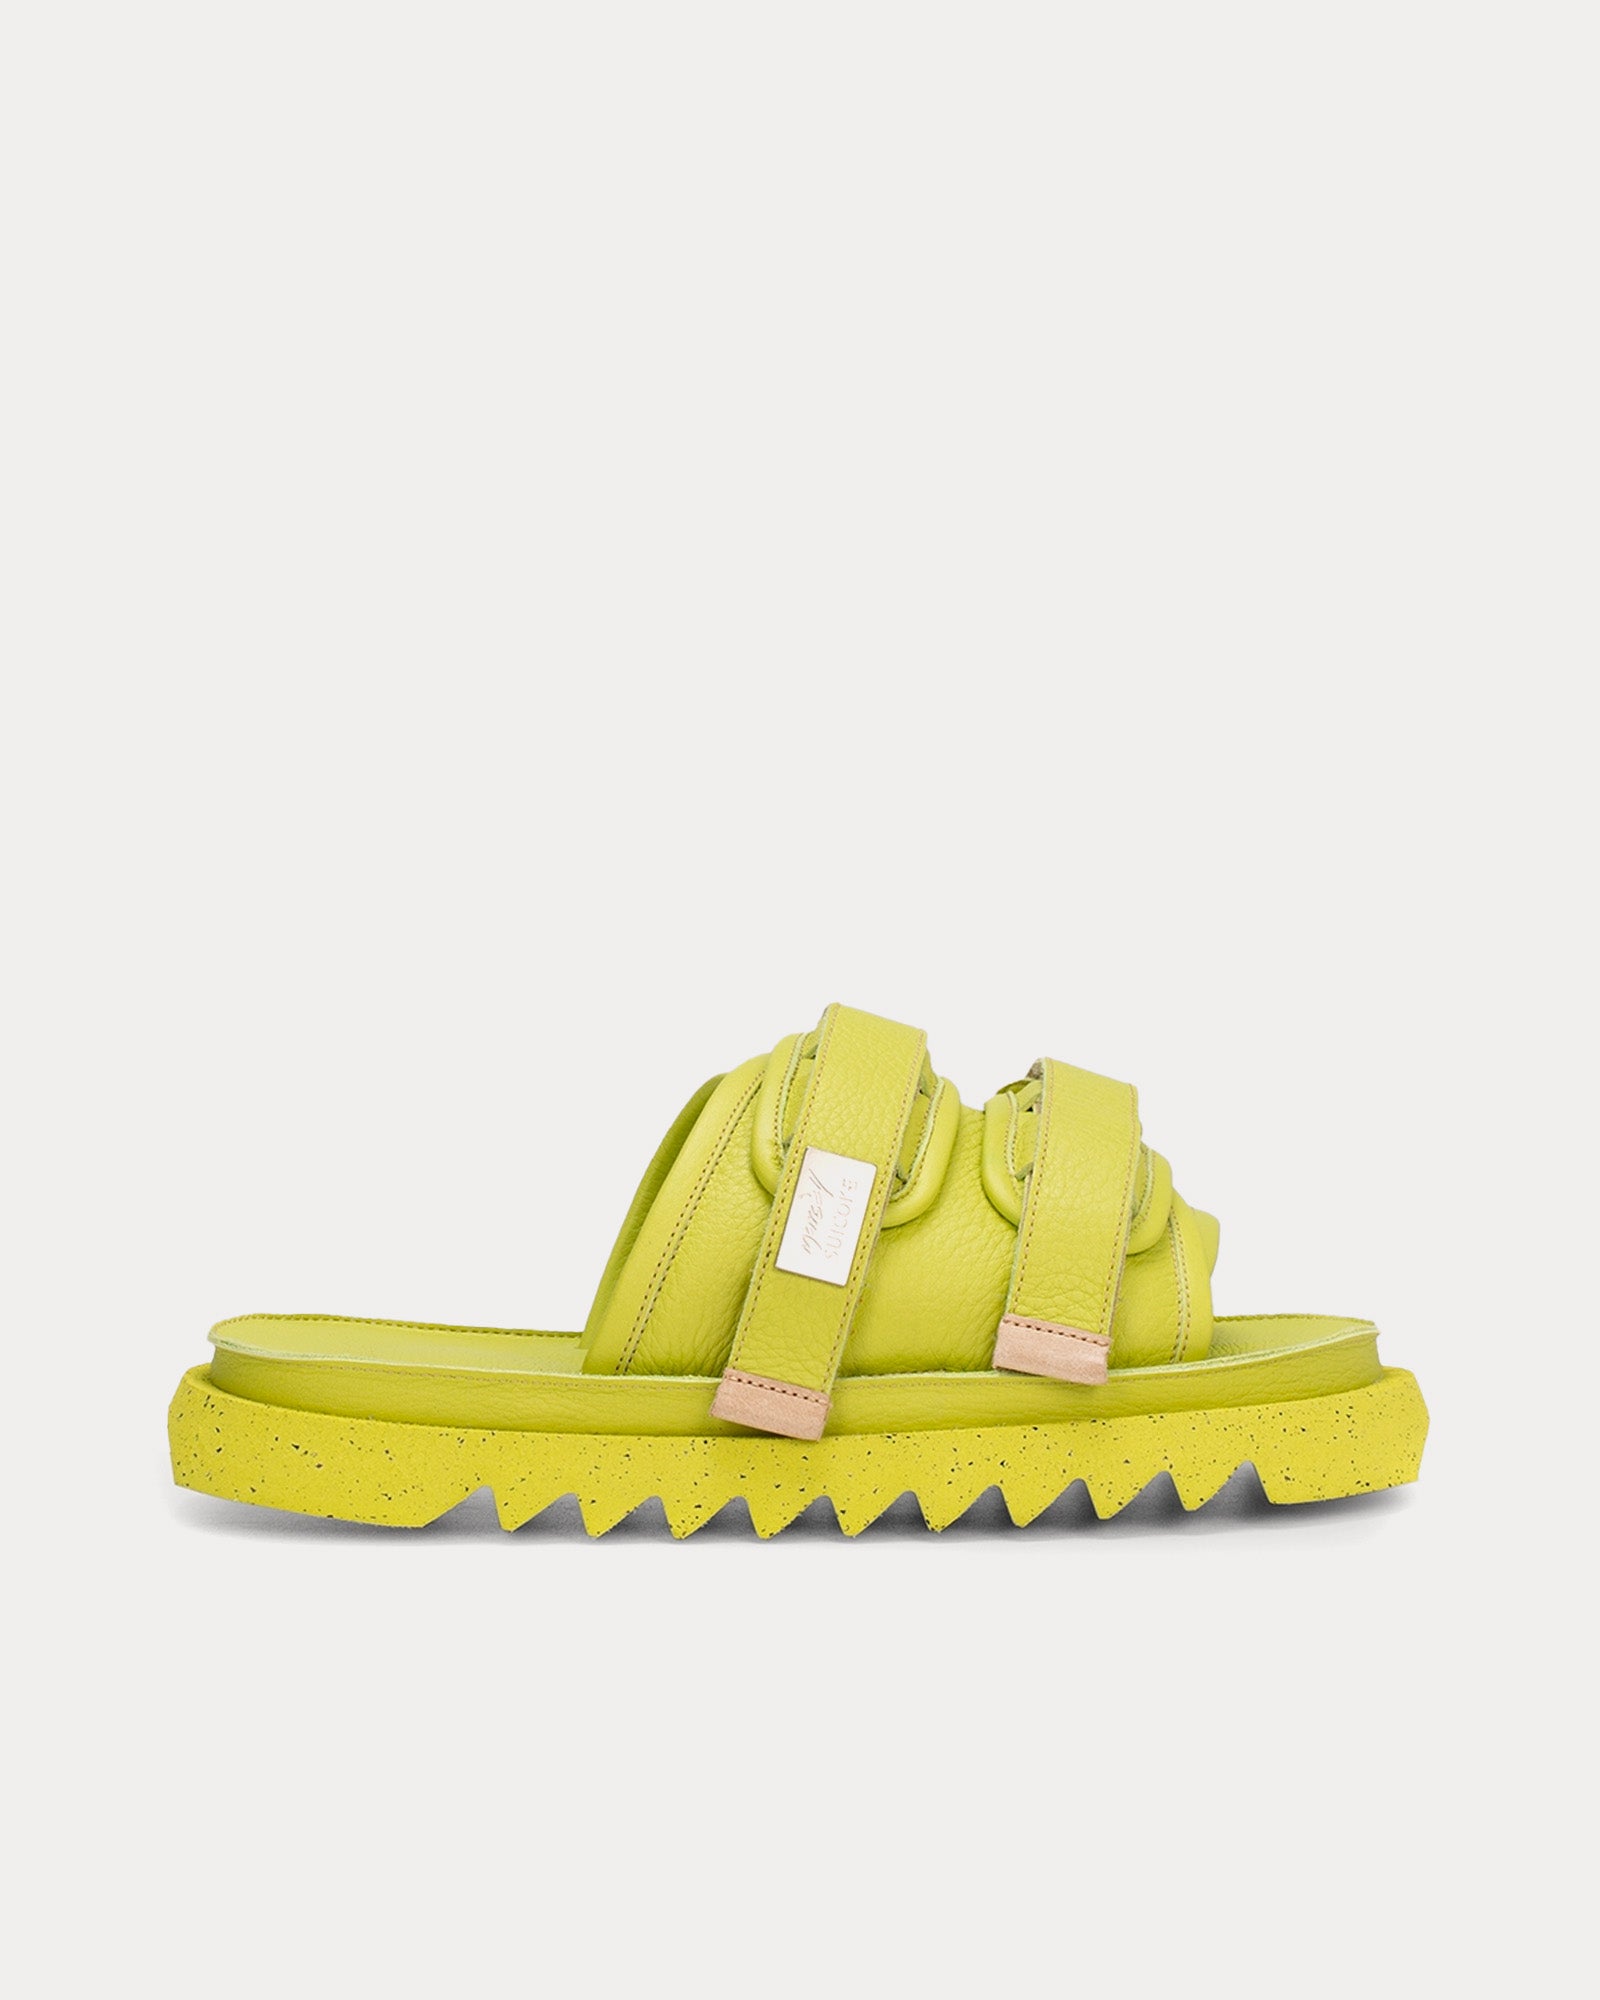 Marsell x Suicoke - Moto Leather Limes Sandals